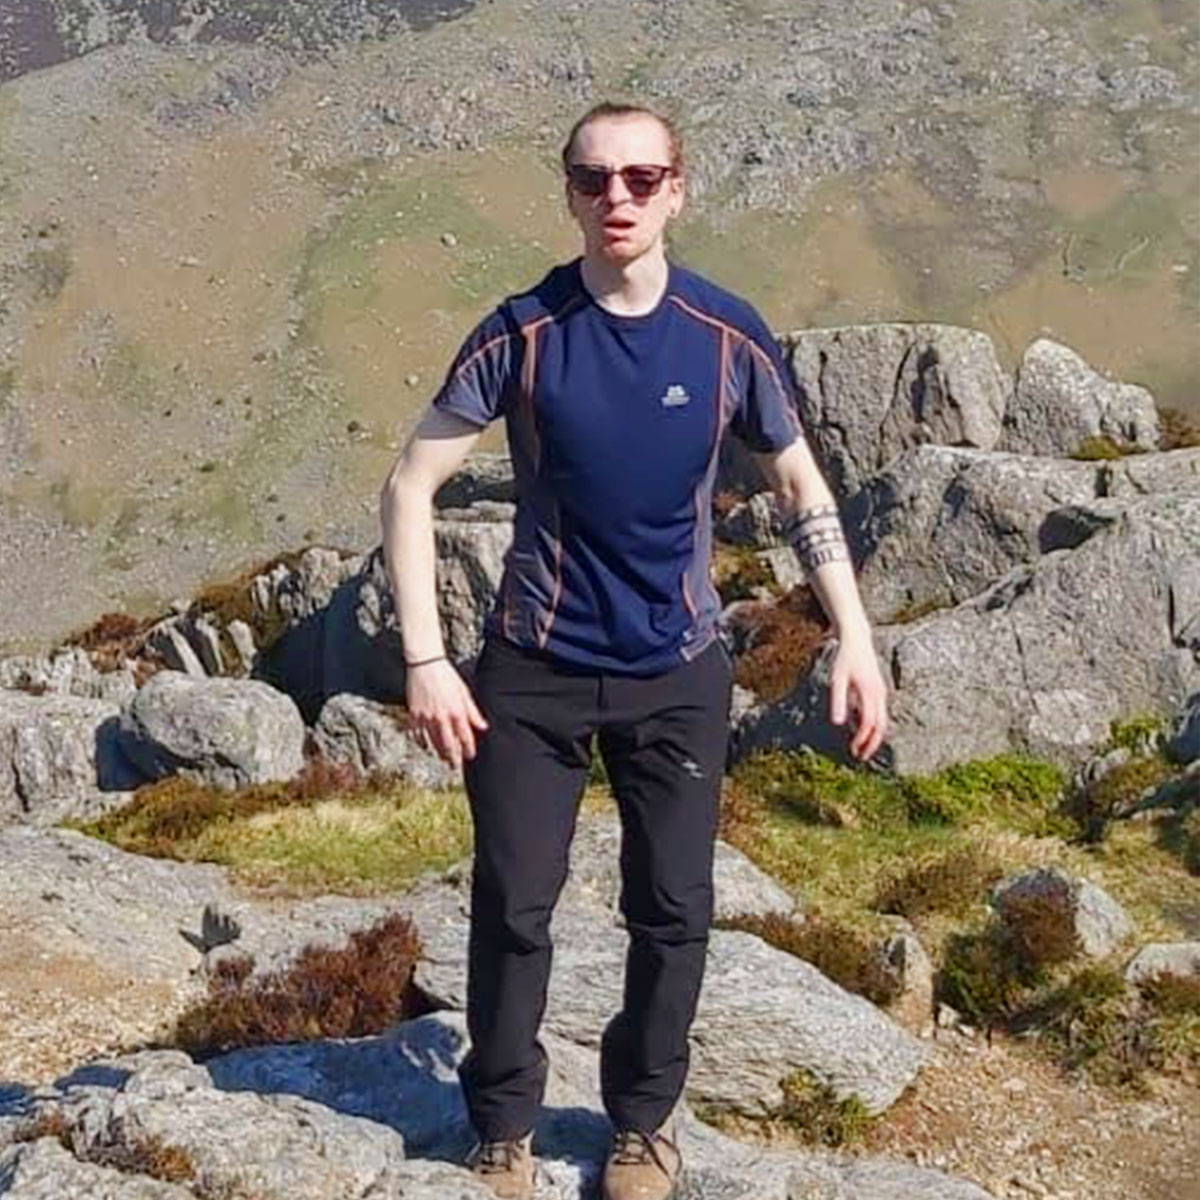 Our marketing manager Ed, visibly regretting not wearing 3RD ROCK trousers whilst on the North face of Tryfan.